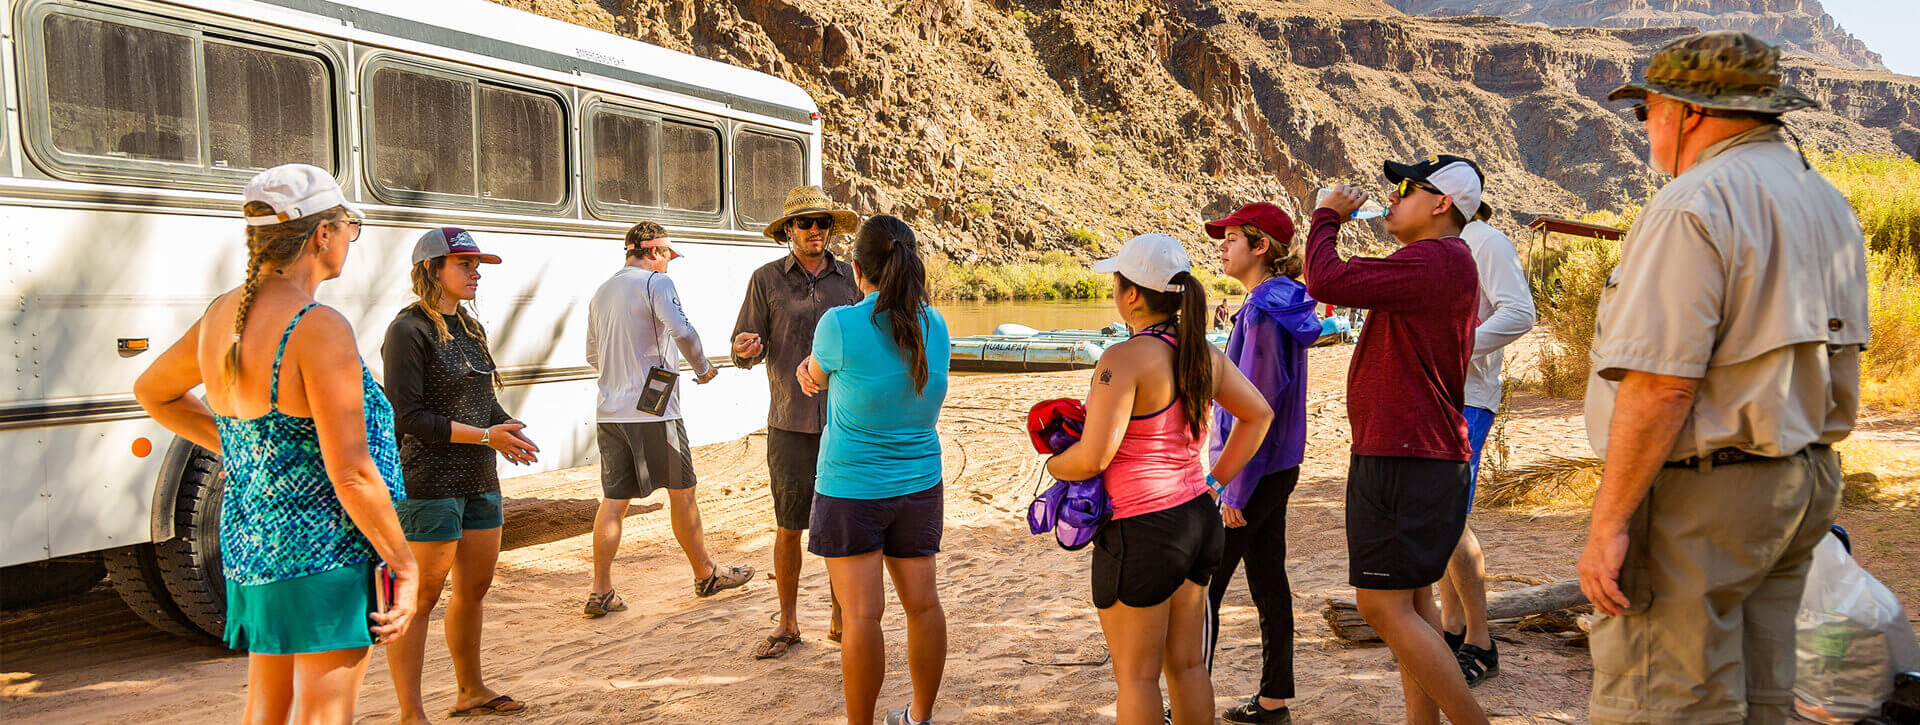 A group of people prepare to go rafting on the Colorado River